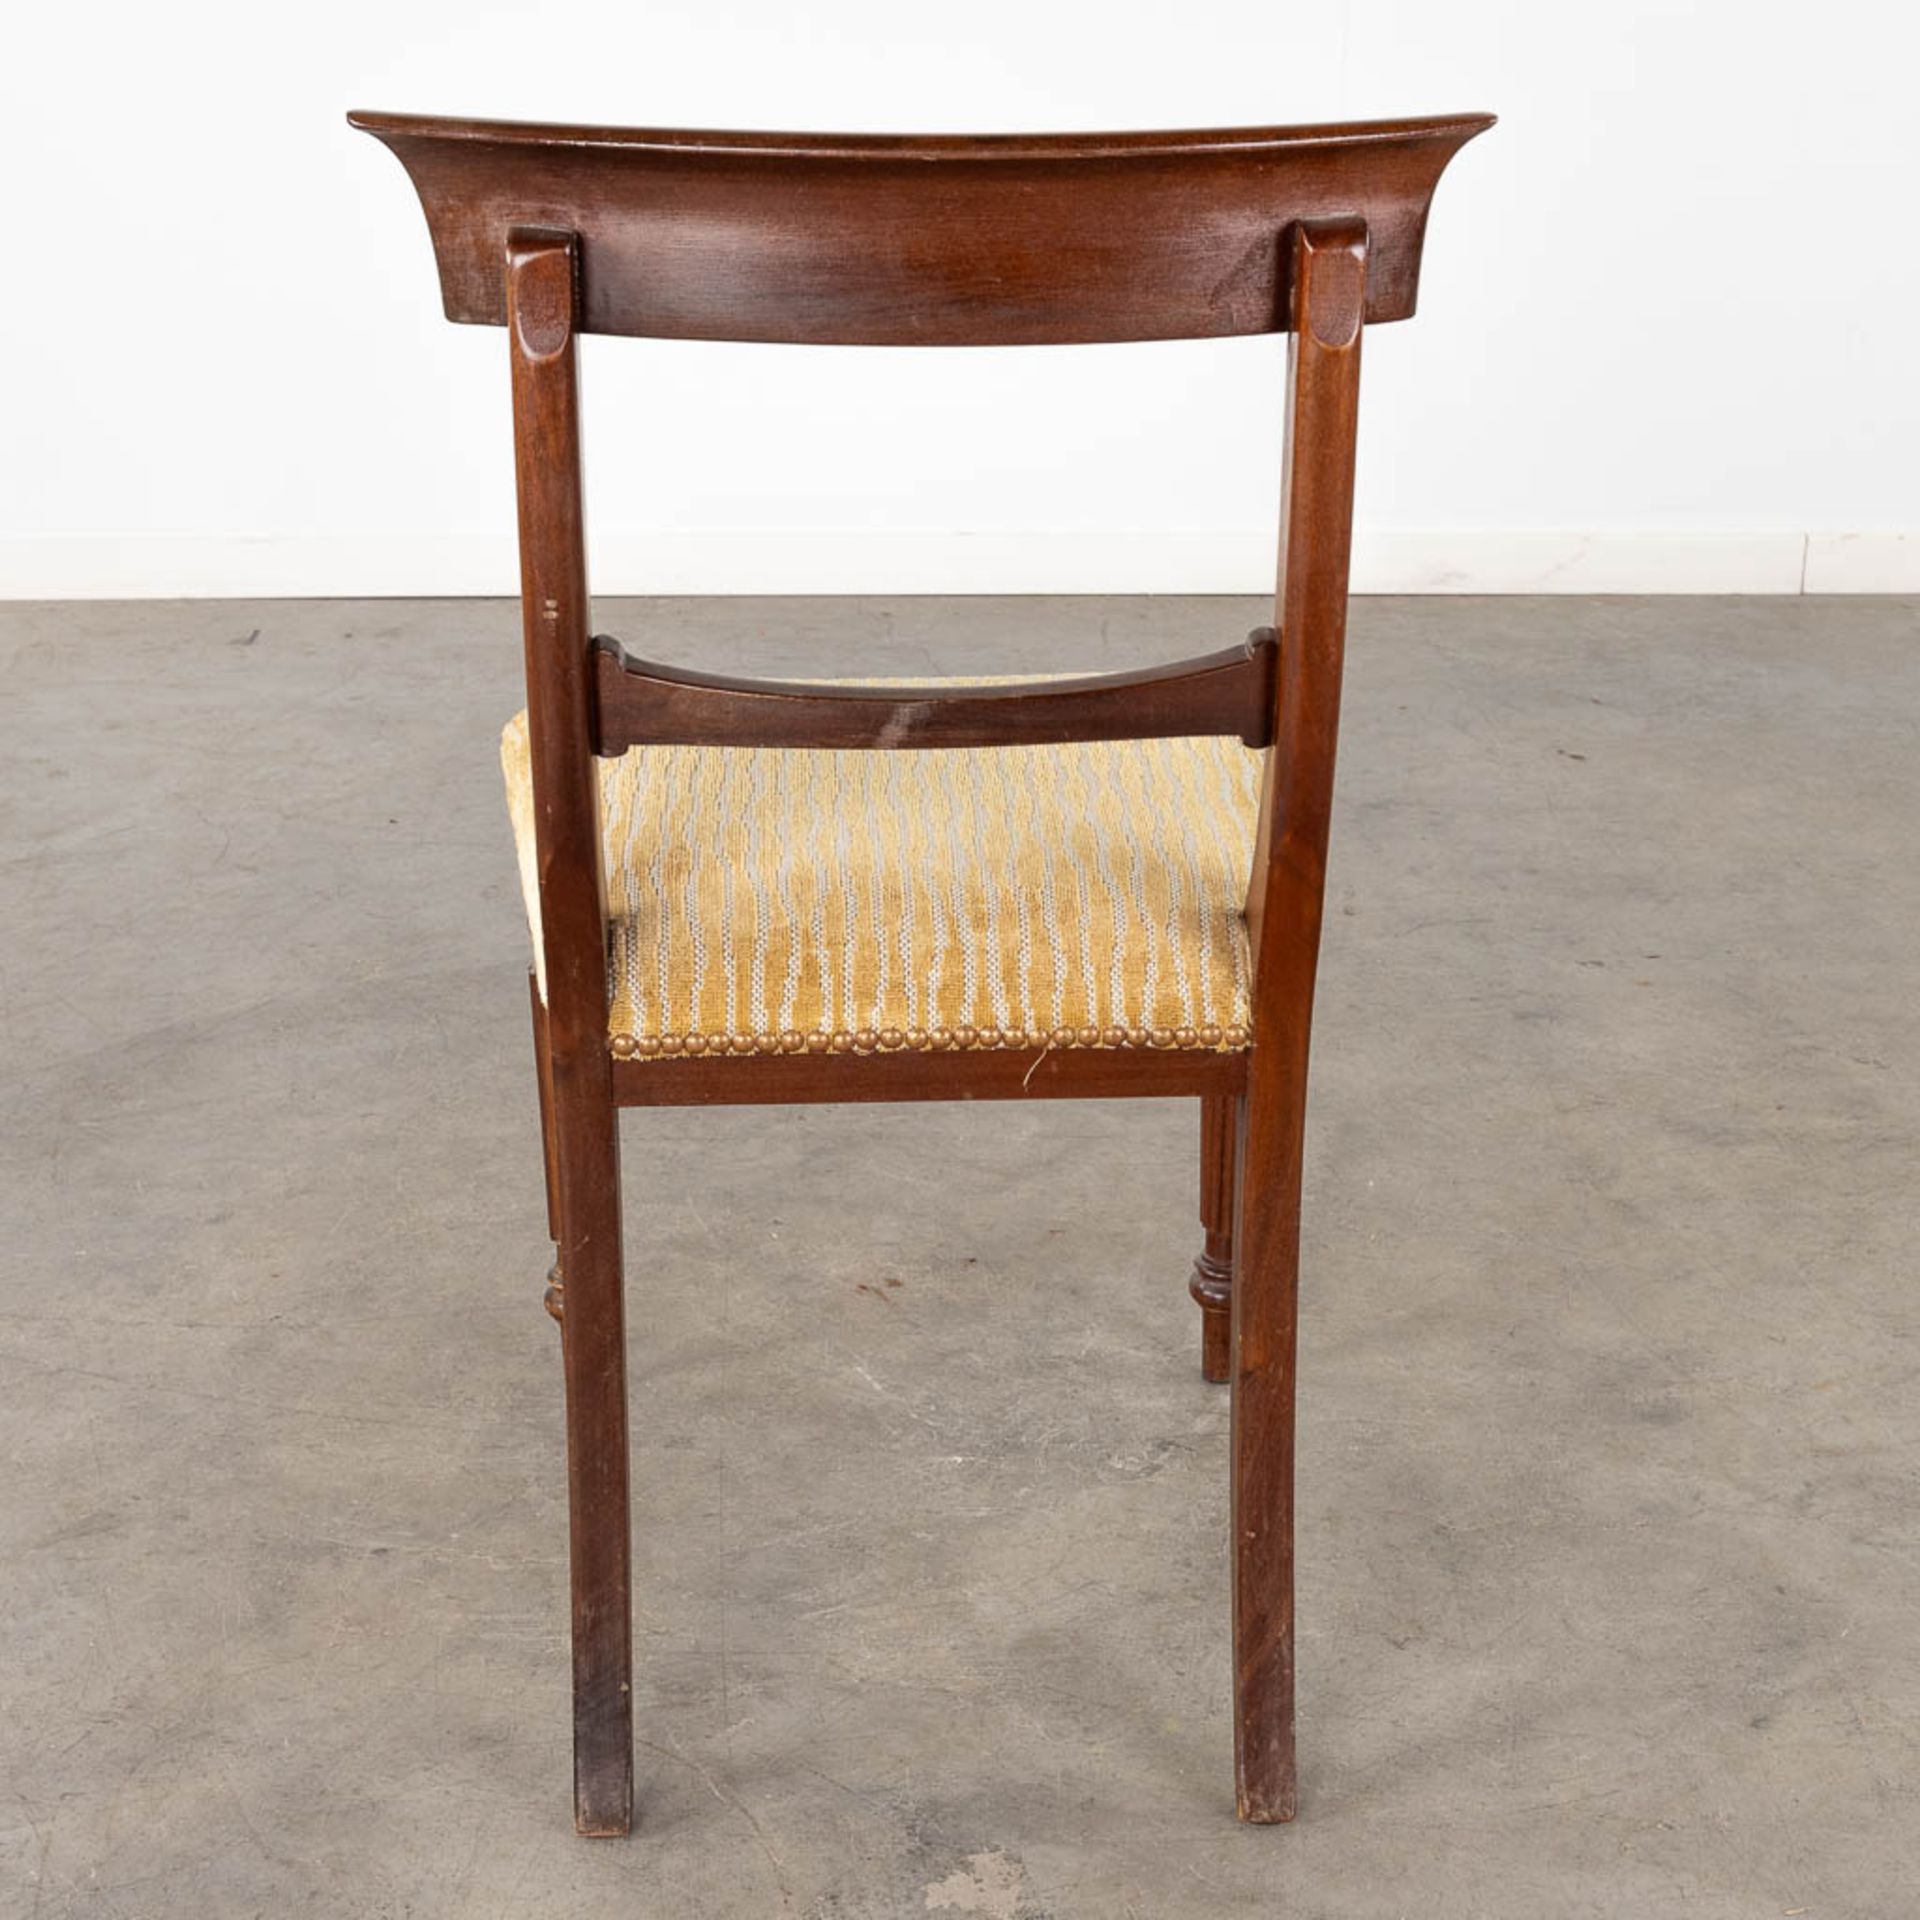 An extendible table, 6 chairs and two armchairs, Mahogany. England. 20th C. (D:144 x W:144 x H:75 cm - Image 20 of 22